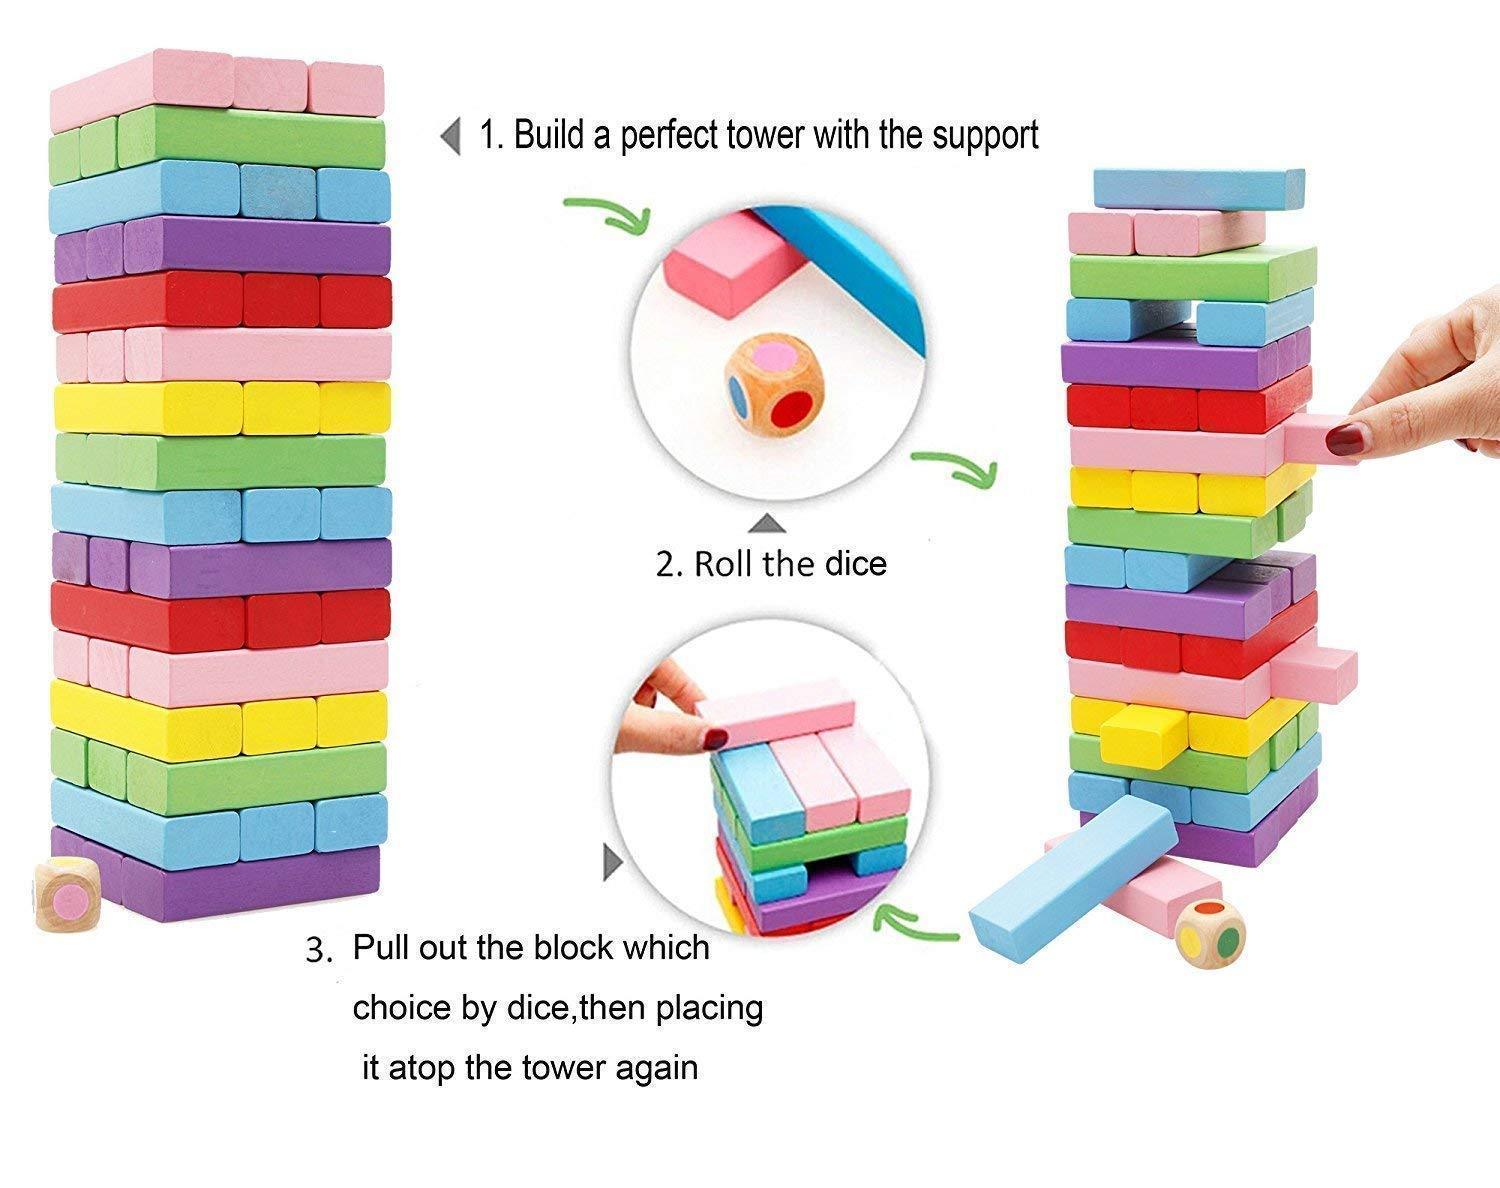 3902 Wooden Blocks, Colorful Wooden Tumbling Tower, Stacking and Balancing Block Toys with Dices for Kids & Adults (54 Pcs) - SkyShopy